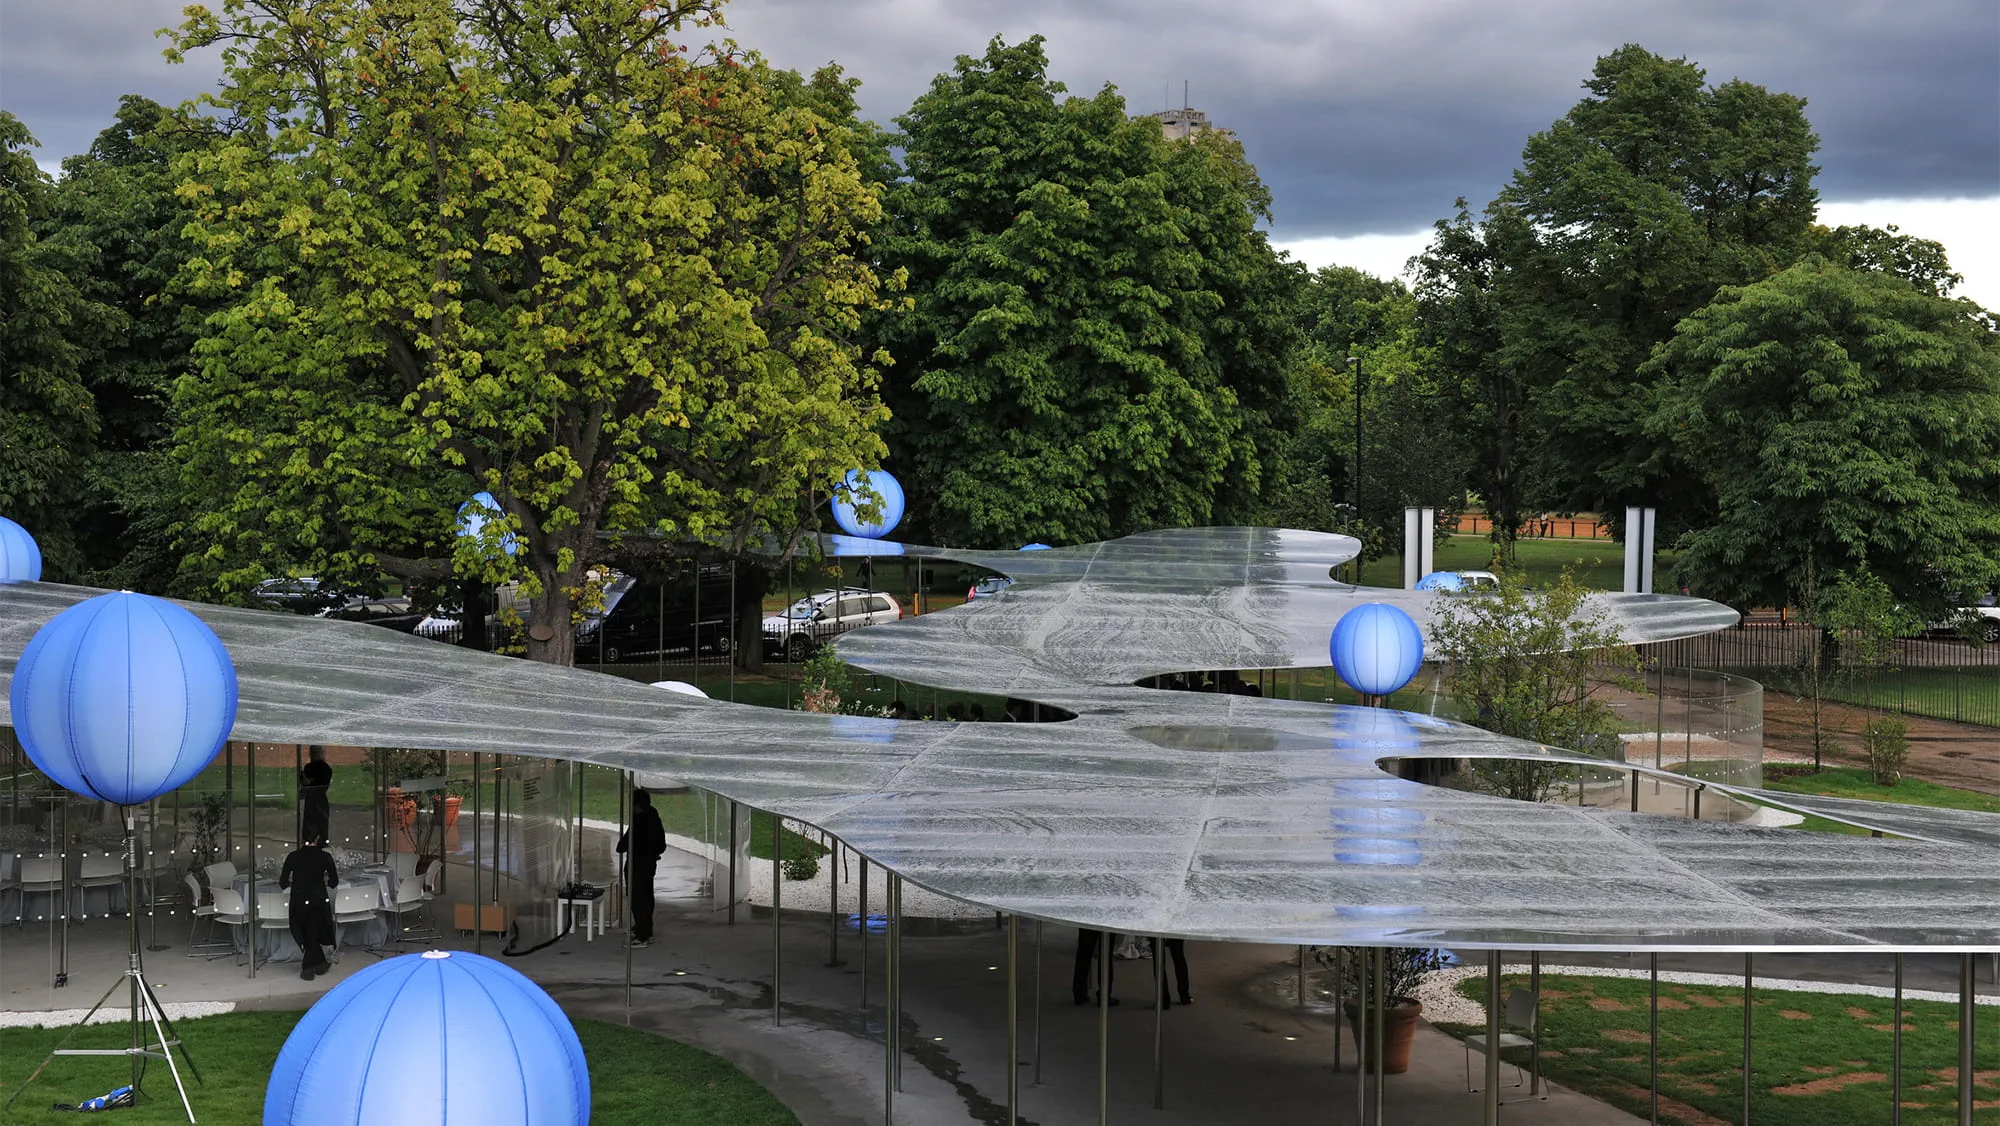 The 2009 Serpentine Pavilion resembles a reflective cloud or a floating pool of water, sitting atop a series of delicate columns. The aluminium roof structure varies in height, wrapping itself around trees in the park. Photo: Daniel Imade